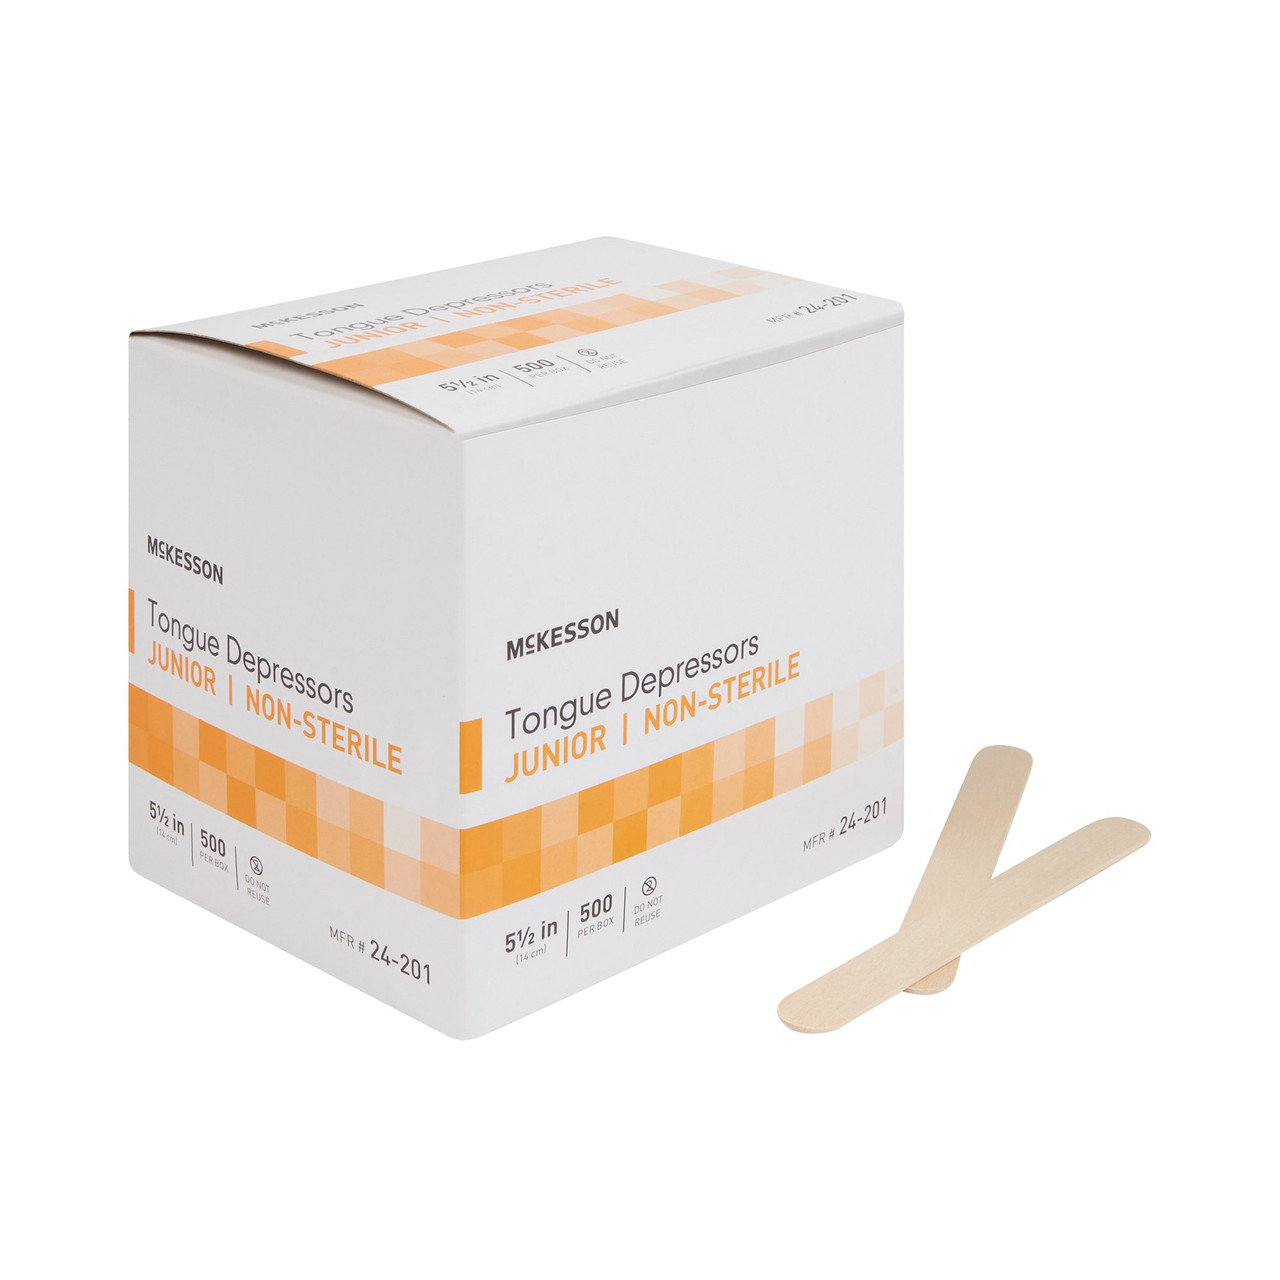 McKesson 6 Inch Length Wood Tongue Depressor Unflavored NonSterile 24-202 1  Box 500/Box, 500 - Ralphs